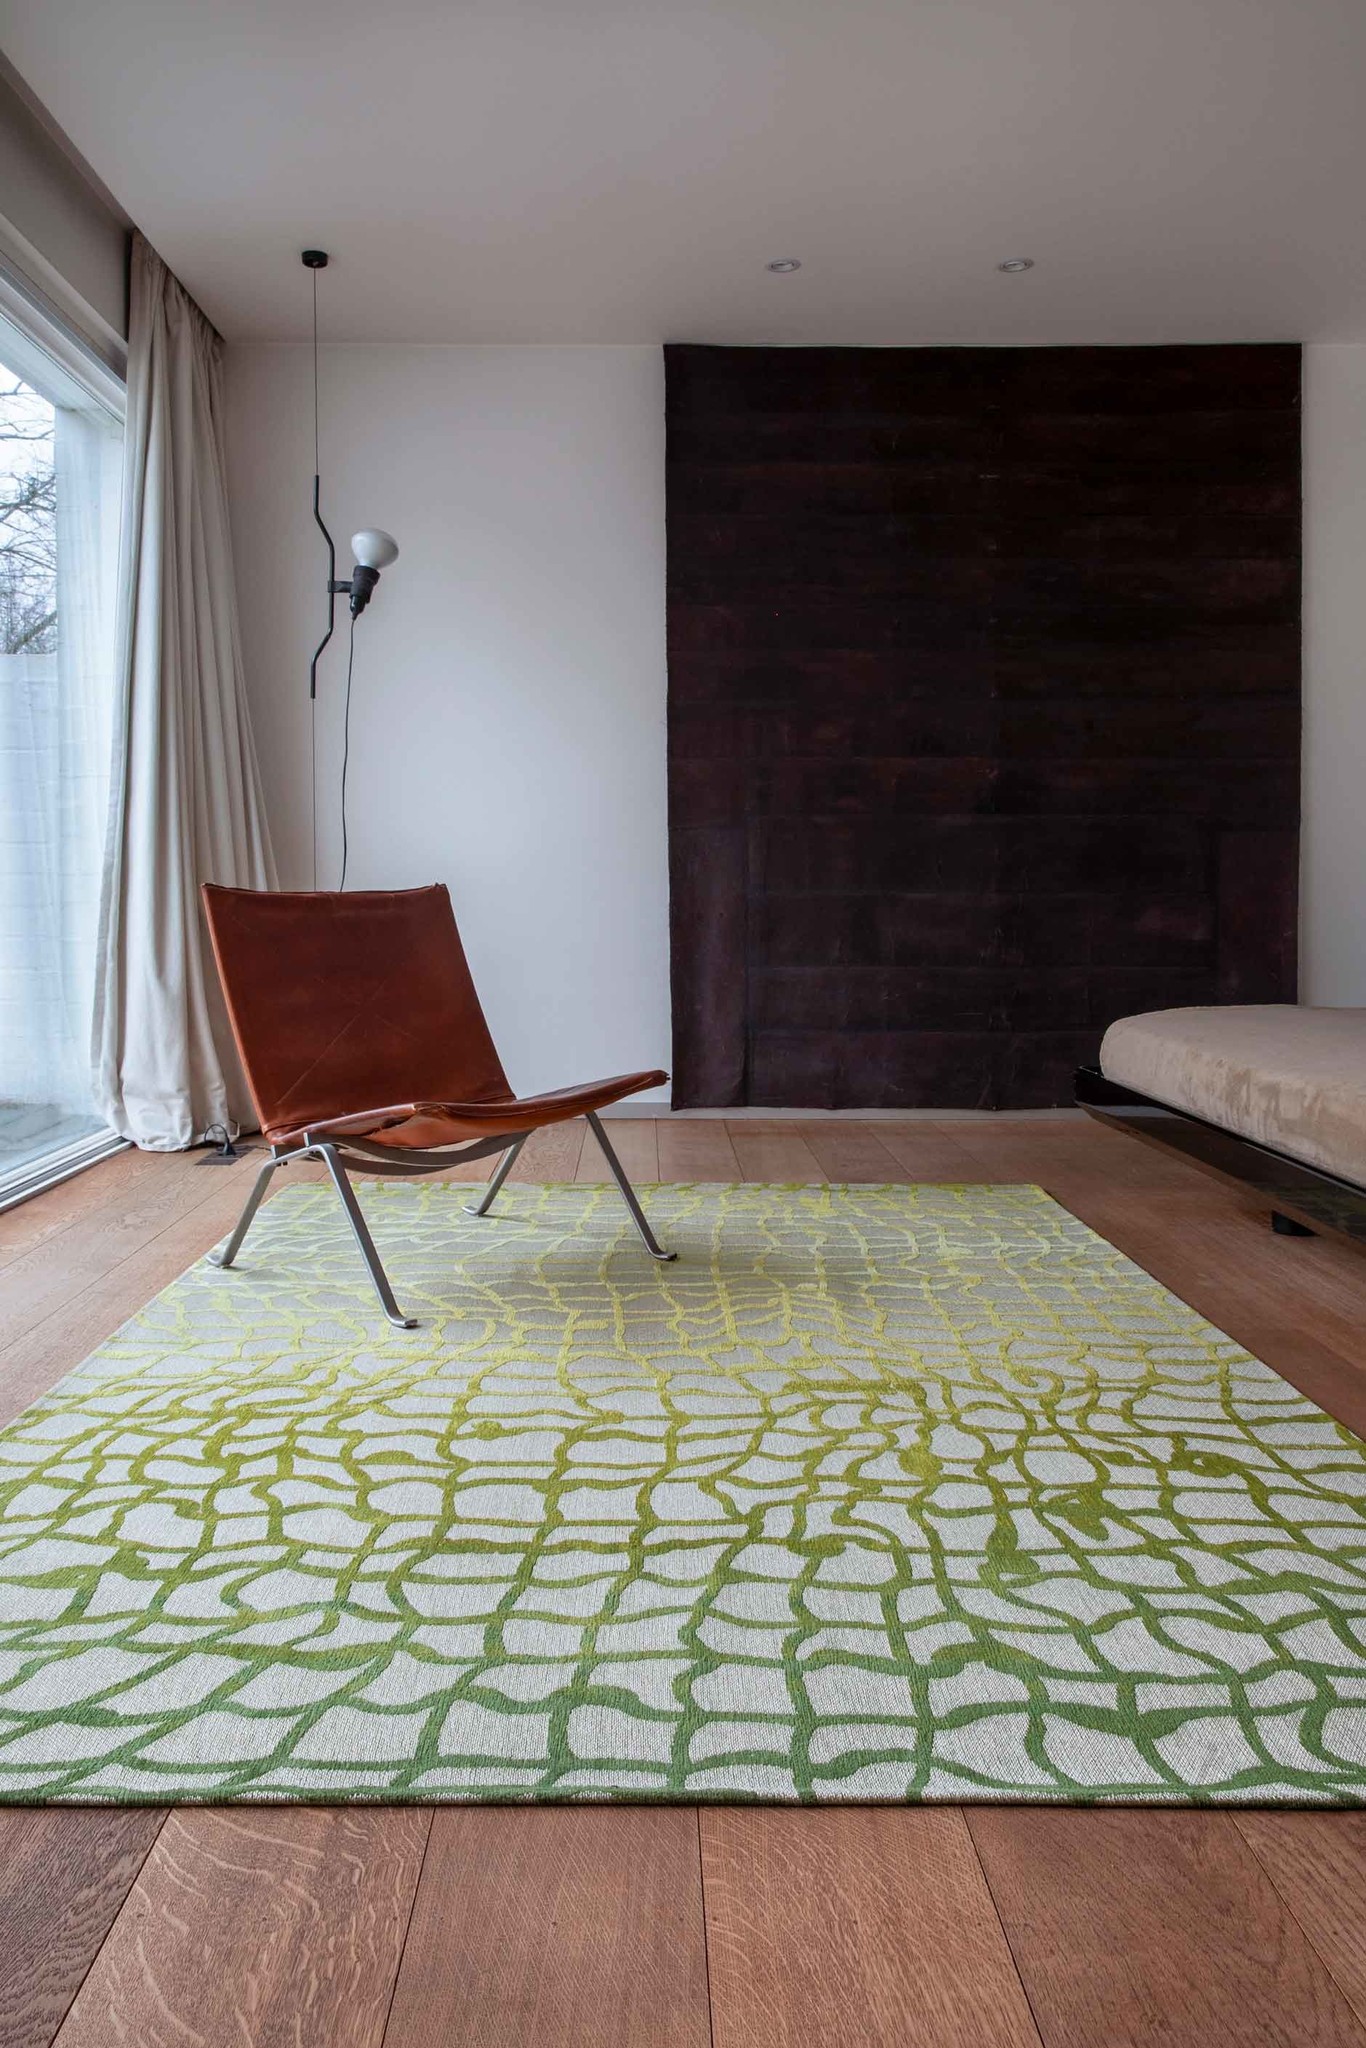 Green Flatwoven Rug ☞ Size: 8' x 11' 2" (240 x 340 cm)